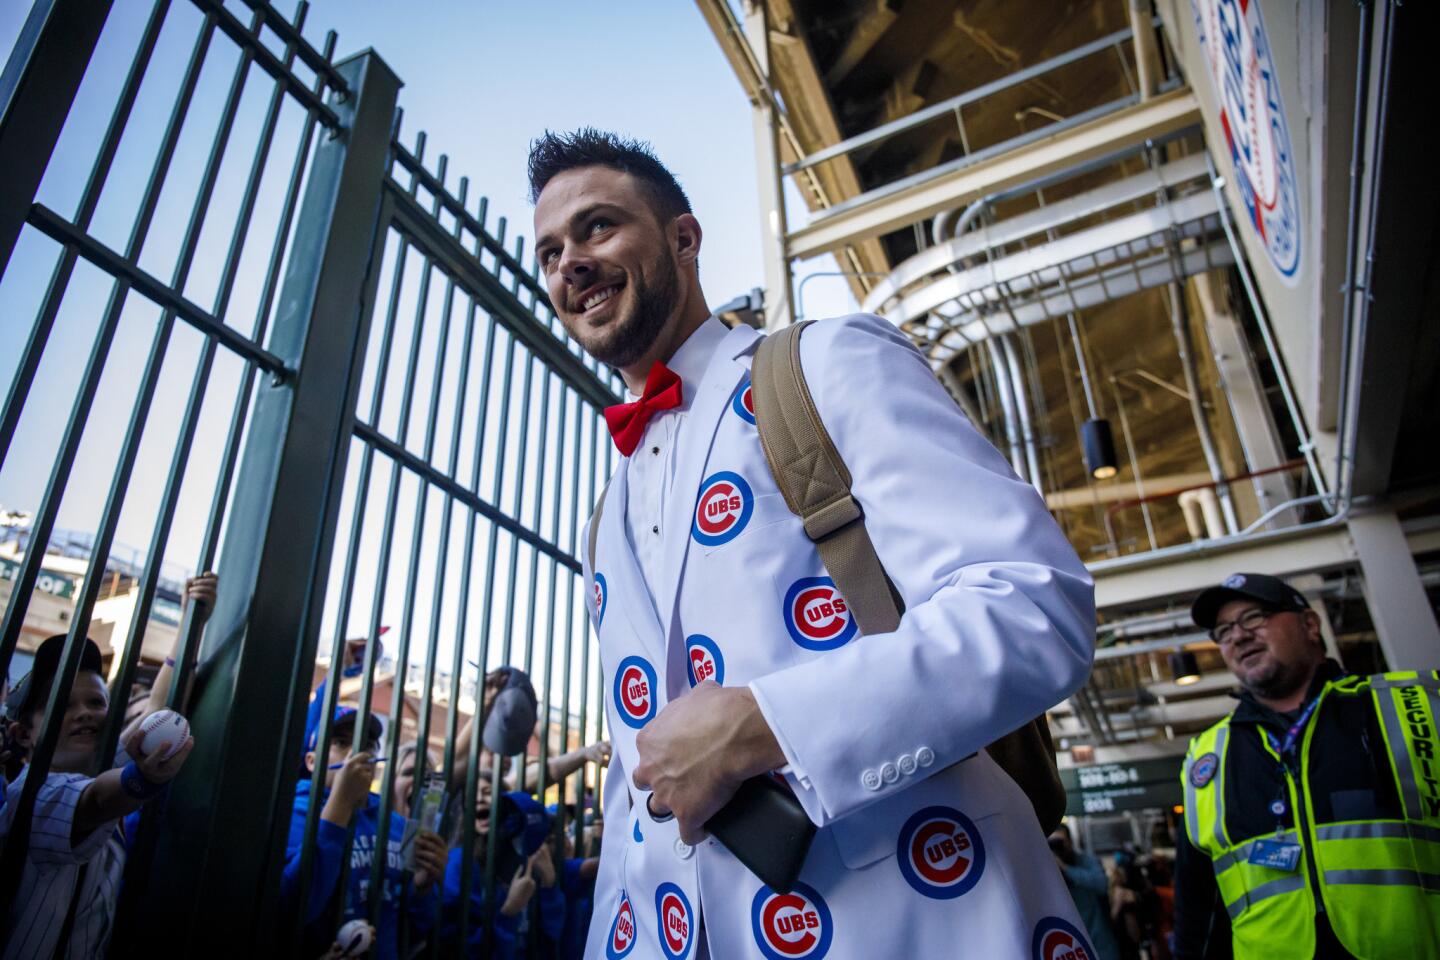 Cubs third baseman Kris Bryant departs for the team's Anchorman-themed road trip Thursday, May 25, 2017, at Wrigley Field.